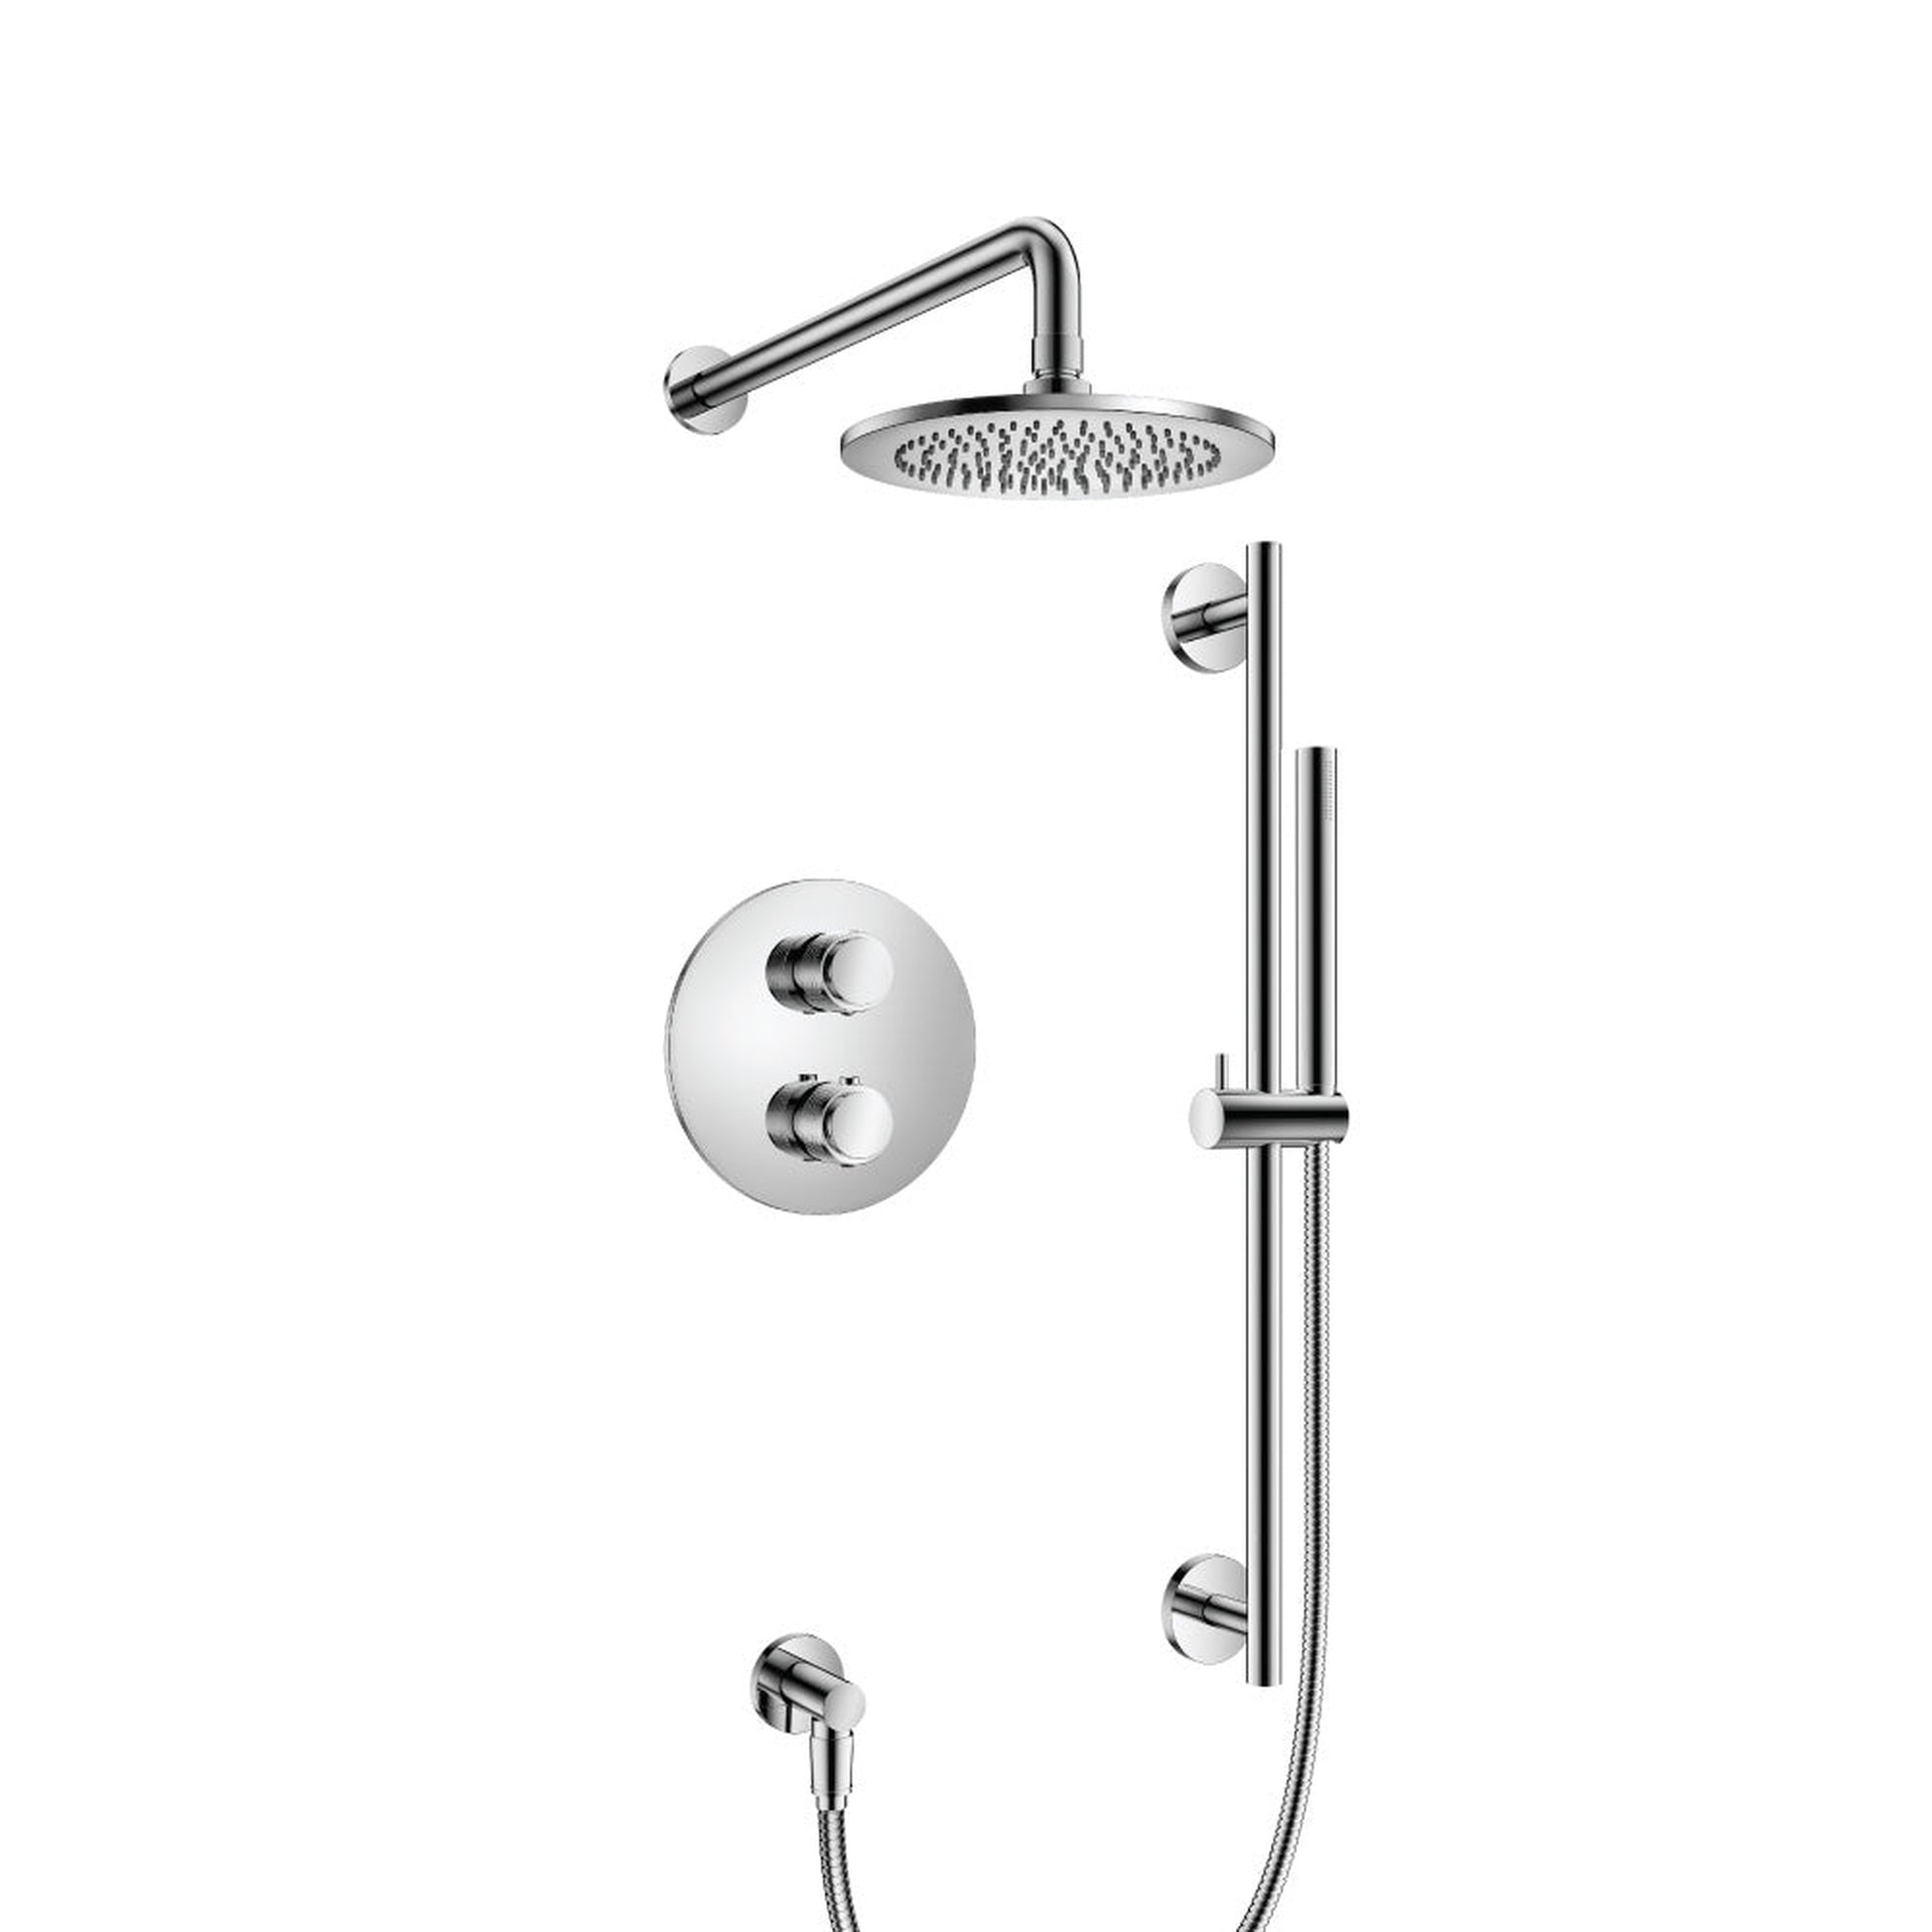 Isenberg Serie 250 Two Output Shower Set With Shower Head, Hand Held and Slide Bar in Chrome (250.7100CP)